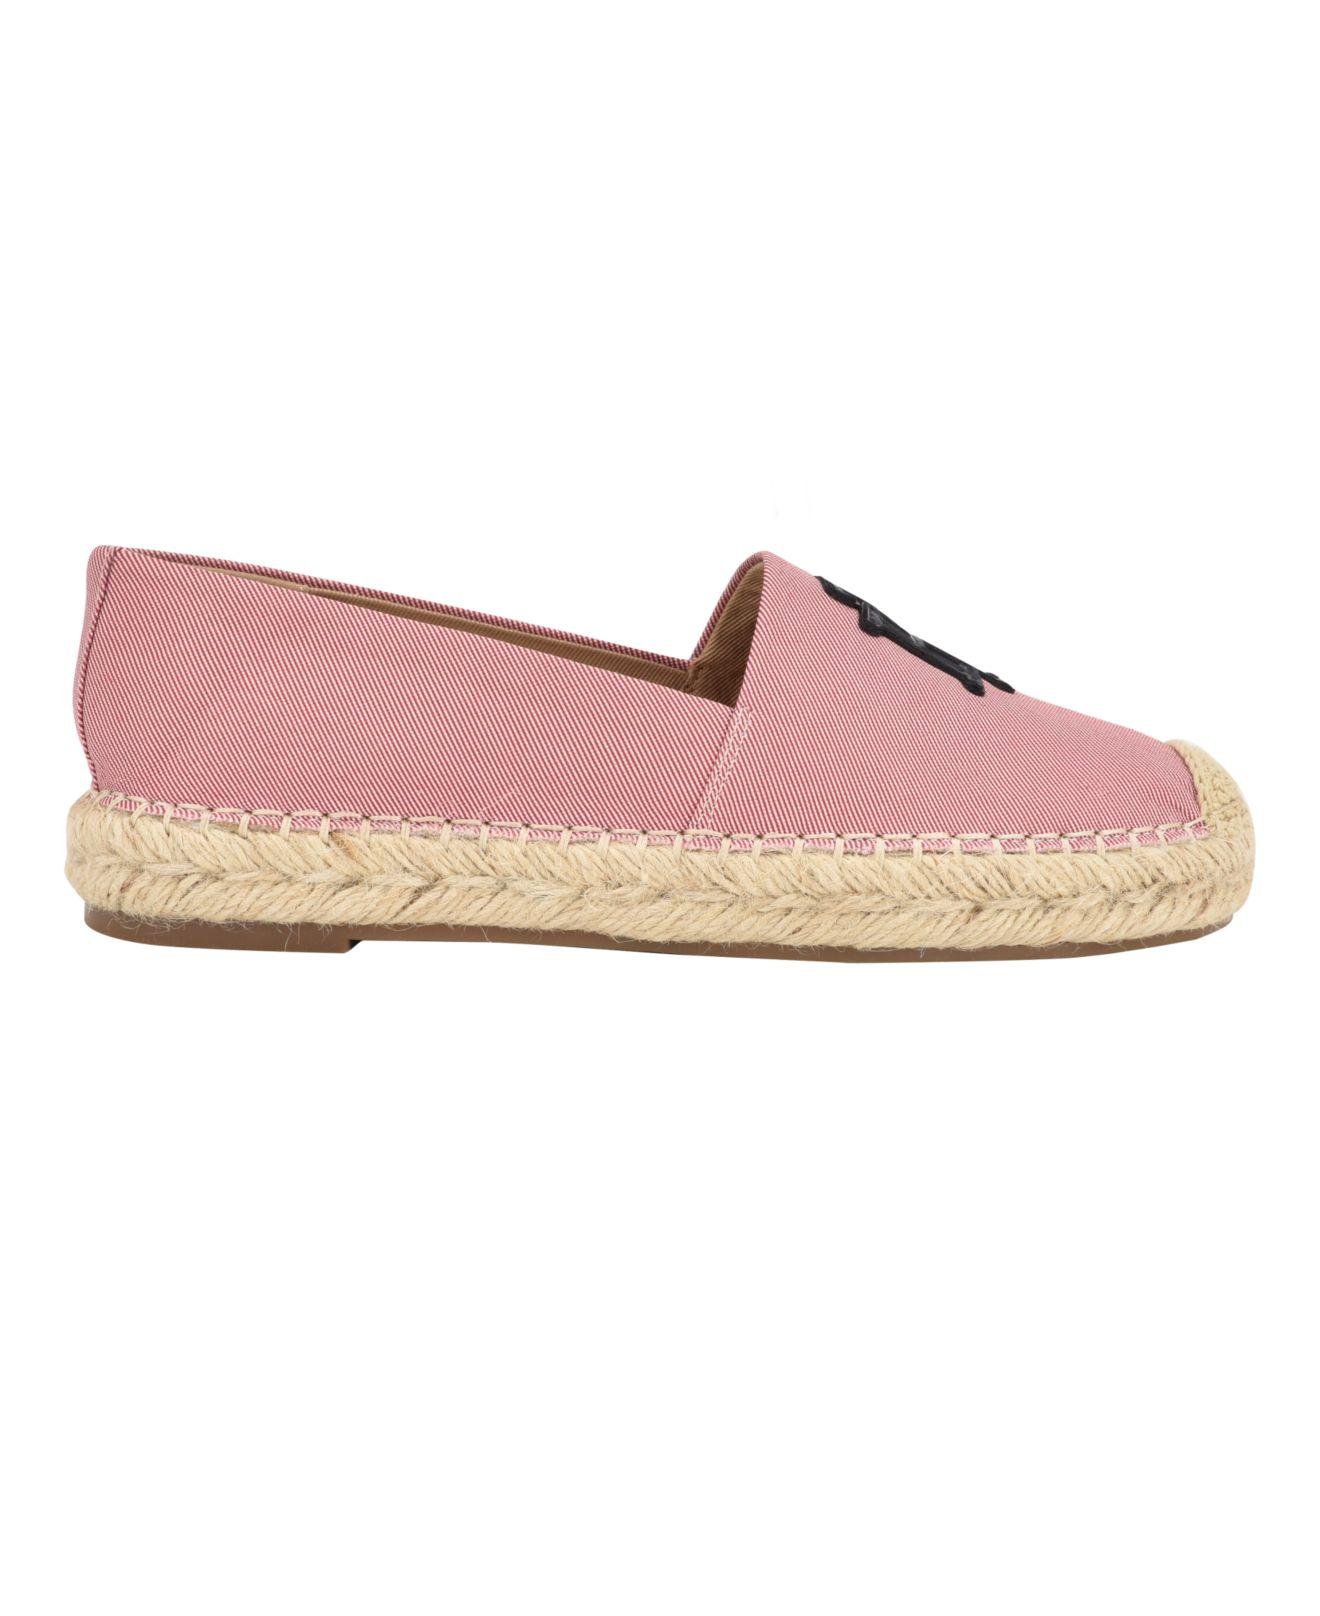 Tommy Hilfiger Peanni Flat Espadrille Closed Toe Shoes in Pink | Lyst